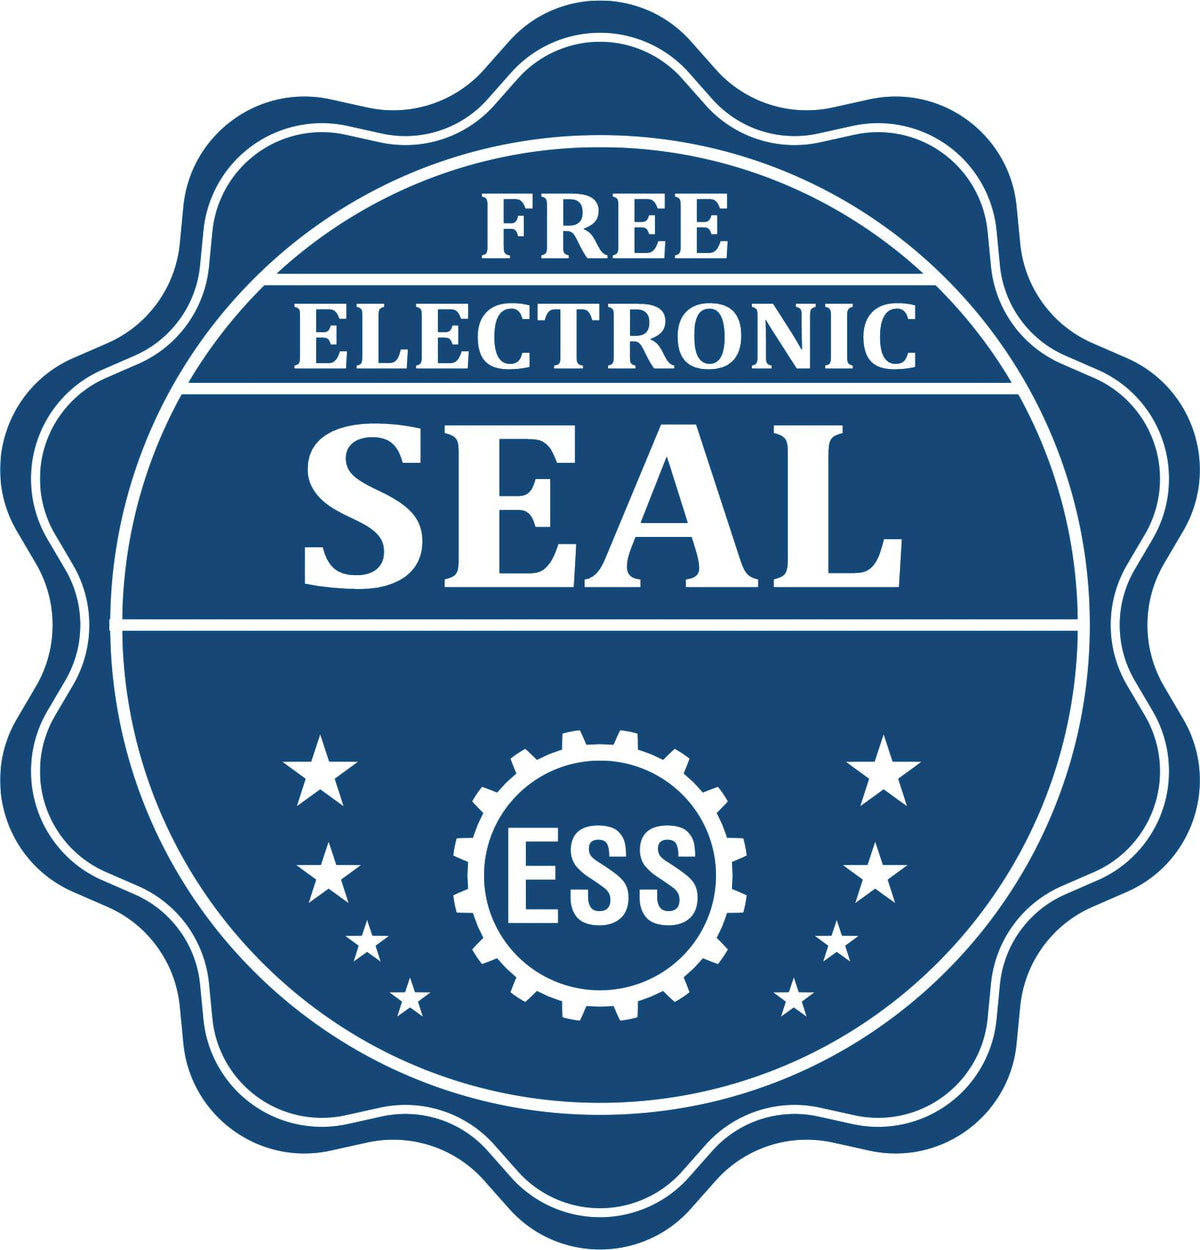 A badge showing a free electronic seal for the MaxLight Premium Pre-Inked Georgia Rectangular Notarial Stamp with stars and the ESS gear on the emblem.